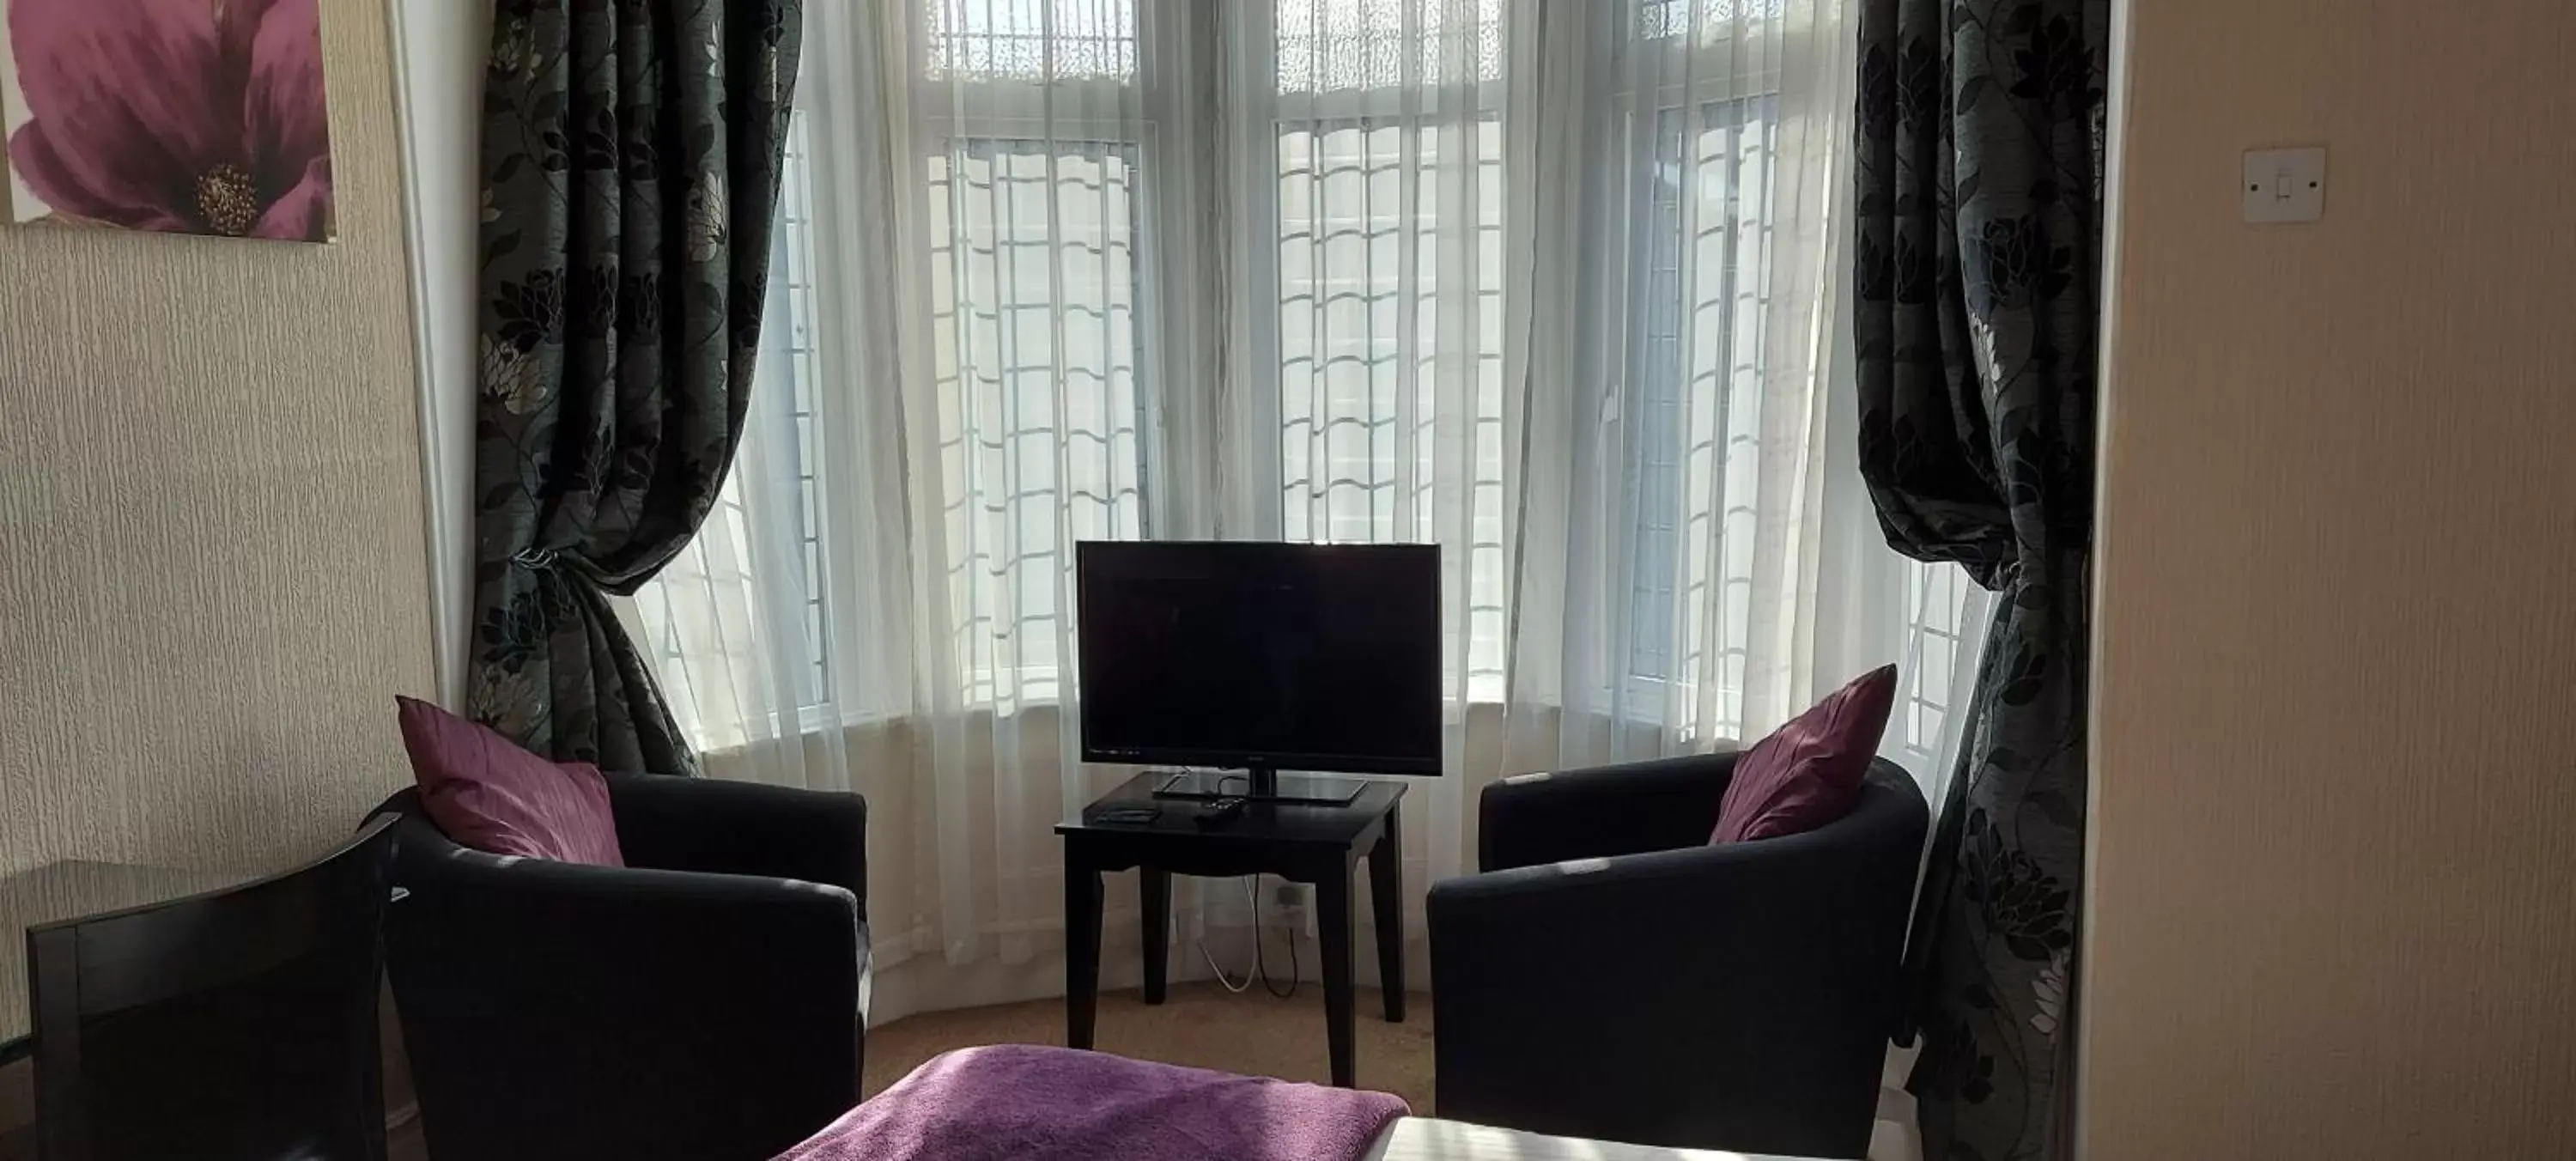 Seating area, TV/Entertainment Center in Cranmore Bed & Breakfast